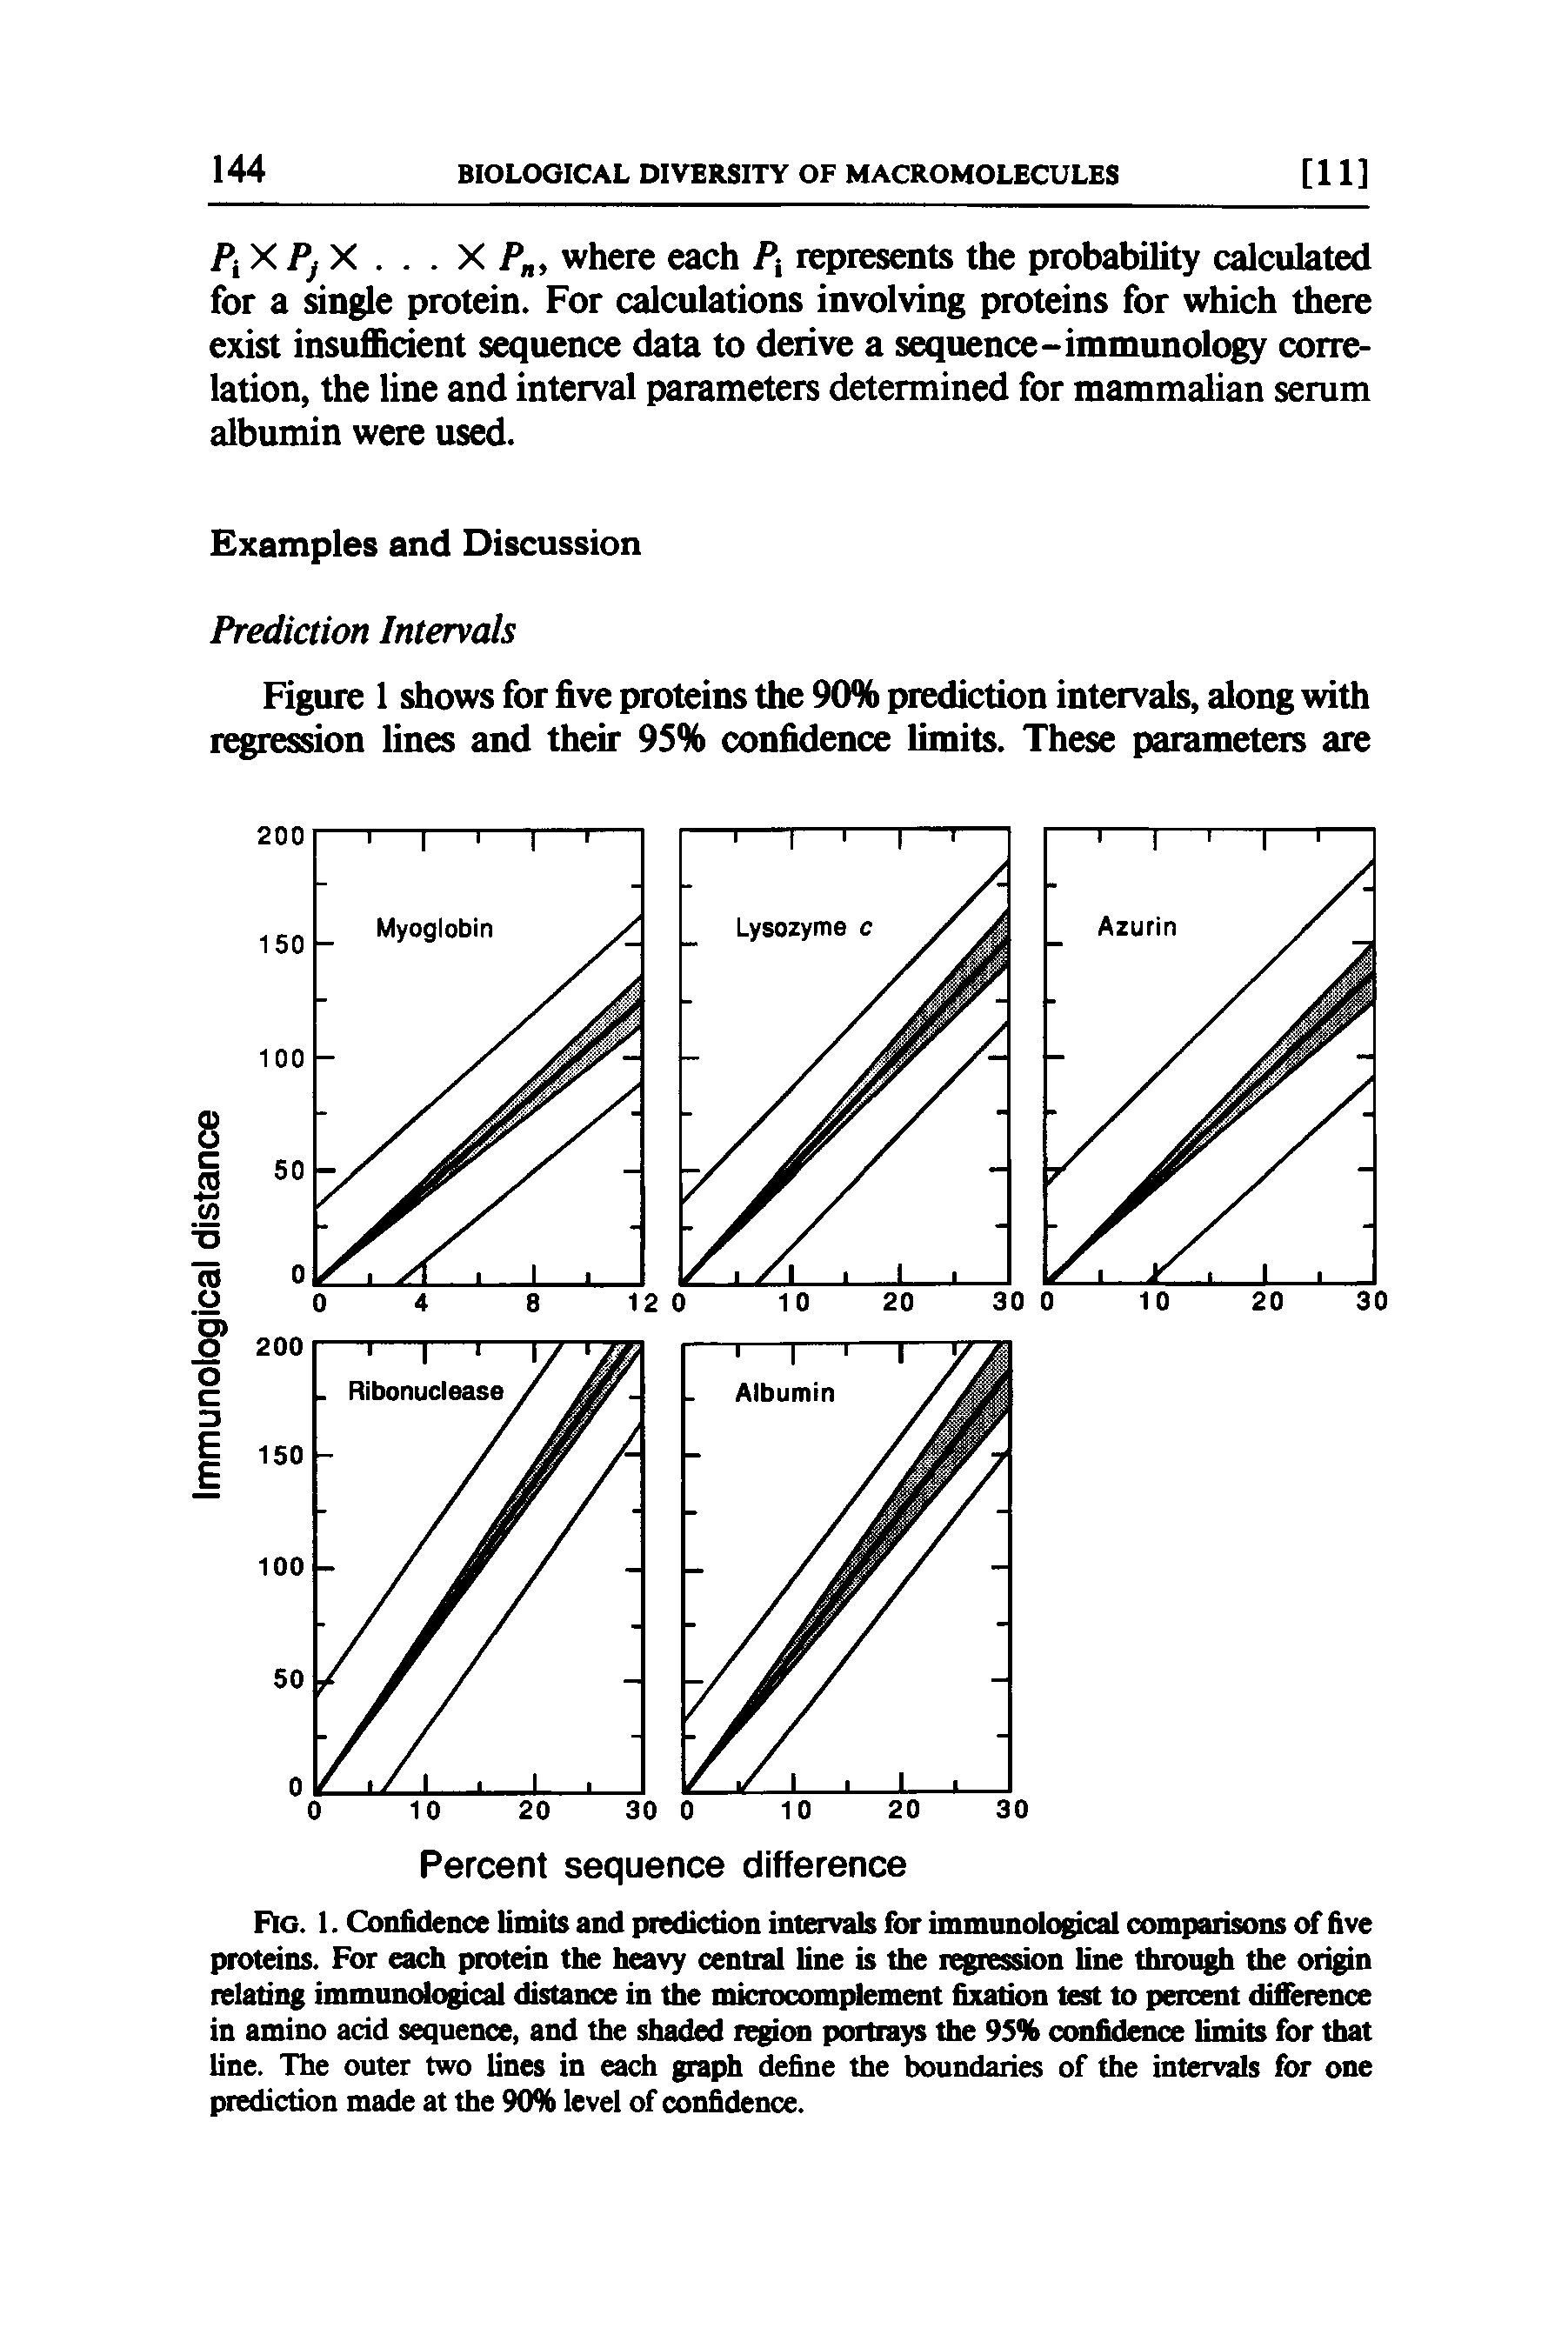 Fig. 1. Confidence limits and prediction intervals for immunological comparisons of five proteins. For each protein the heavy central line is the regression line through the origin relating immunological distance in the microcomplement fixation test to percent difference in amino acid sequence, and the shaded region portrays the 95% confidence limits for that line. The outer two lines in each graph define the boundaries of the intervals for one prediction made at the 90% level of confidence.